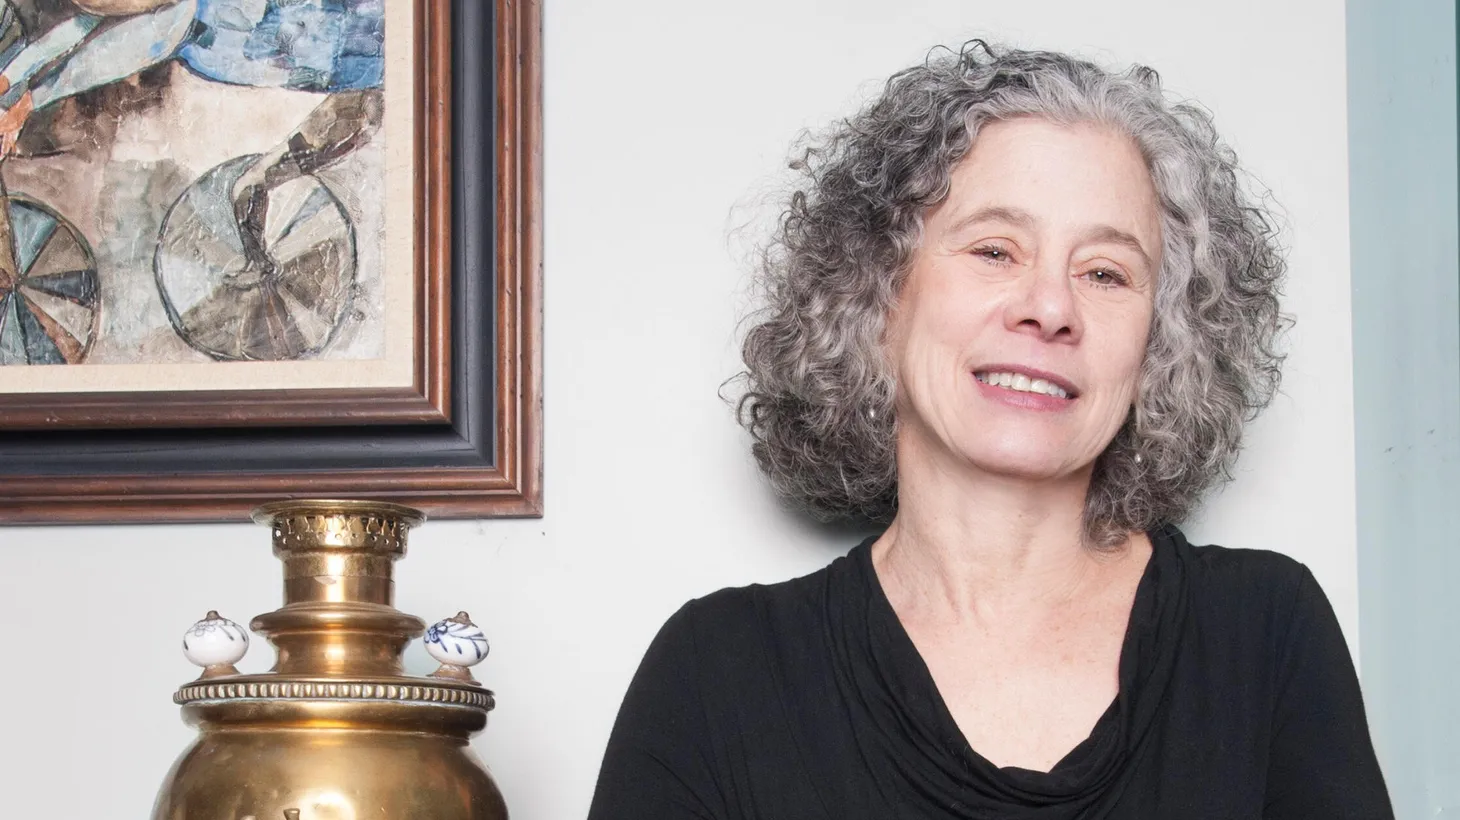 With a fascination for Russian culture, food scholar Darra Goldstein studied the language in college and later returned to the country her grandparents fled.